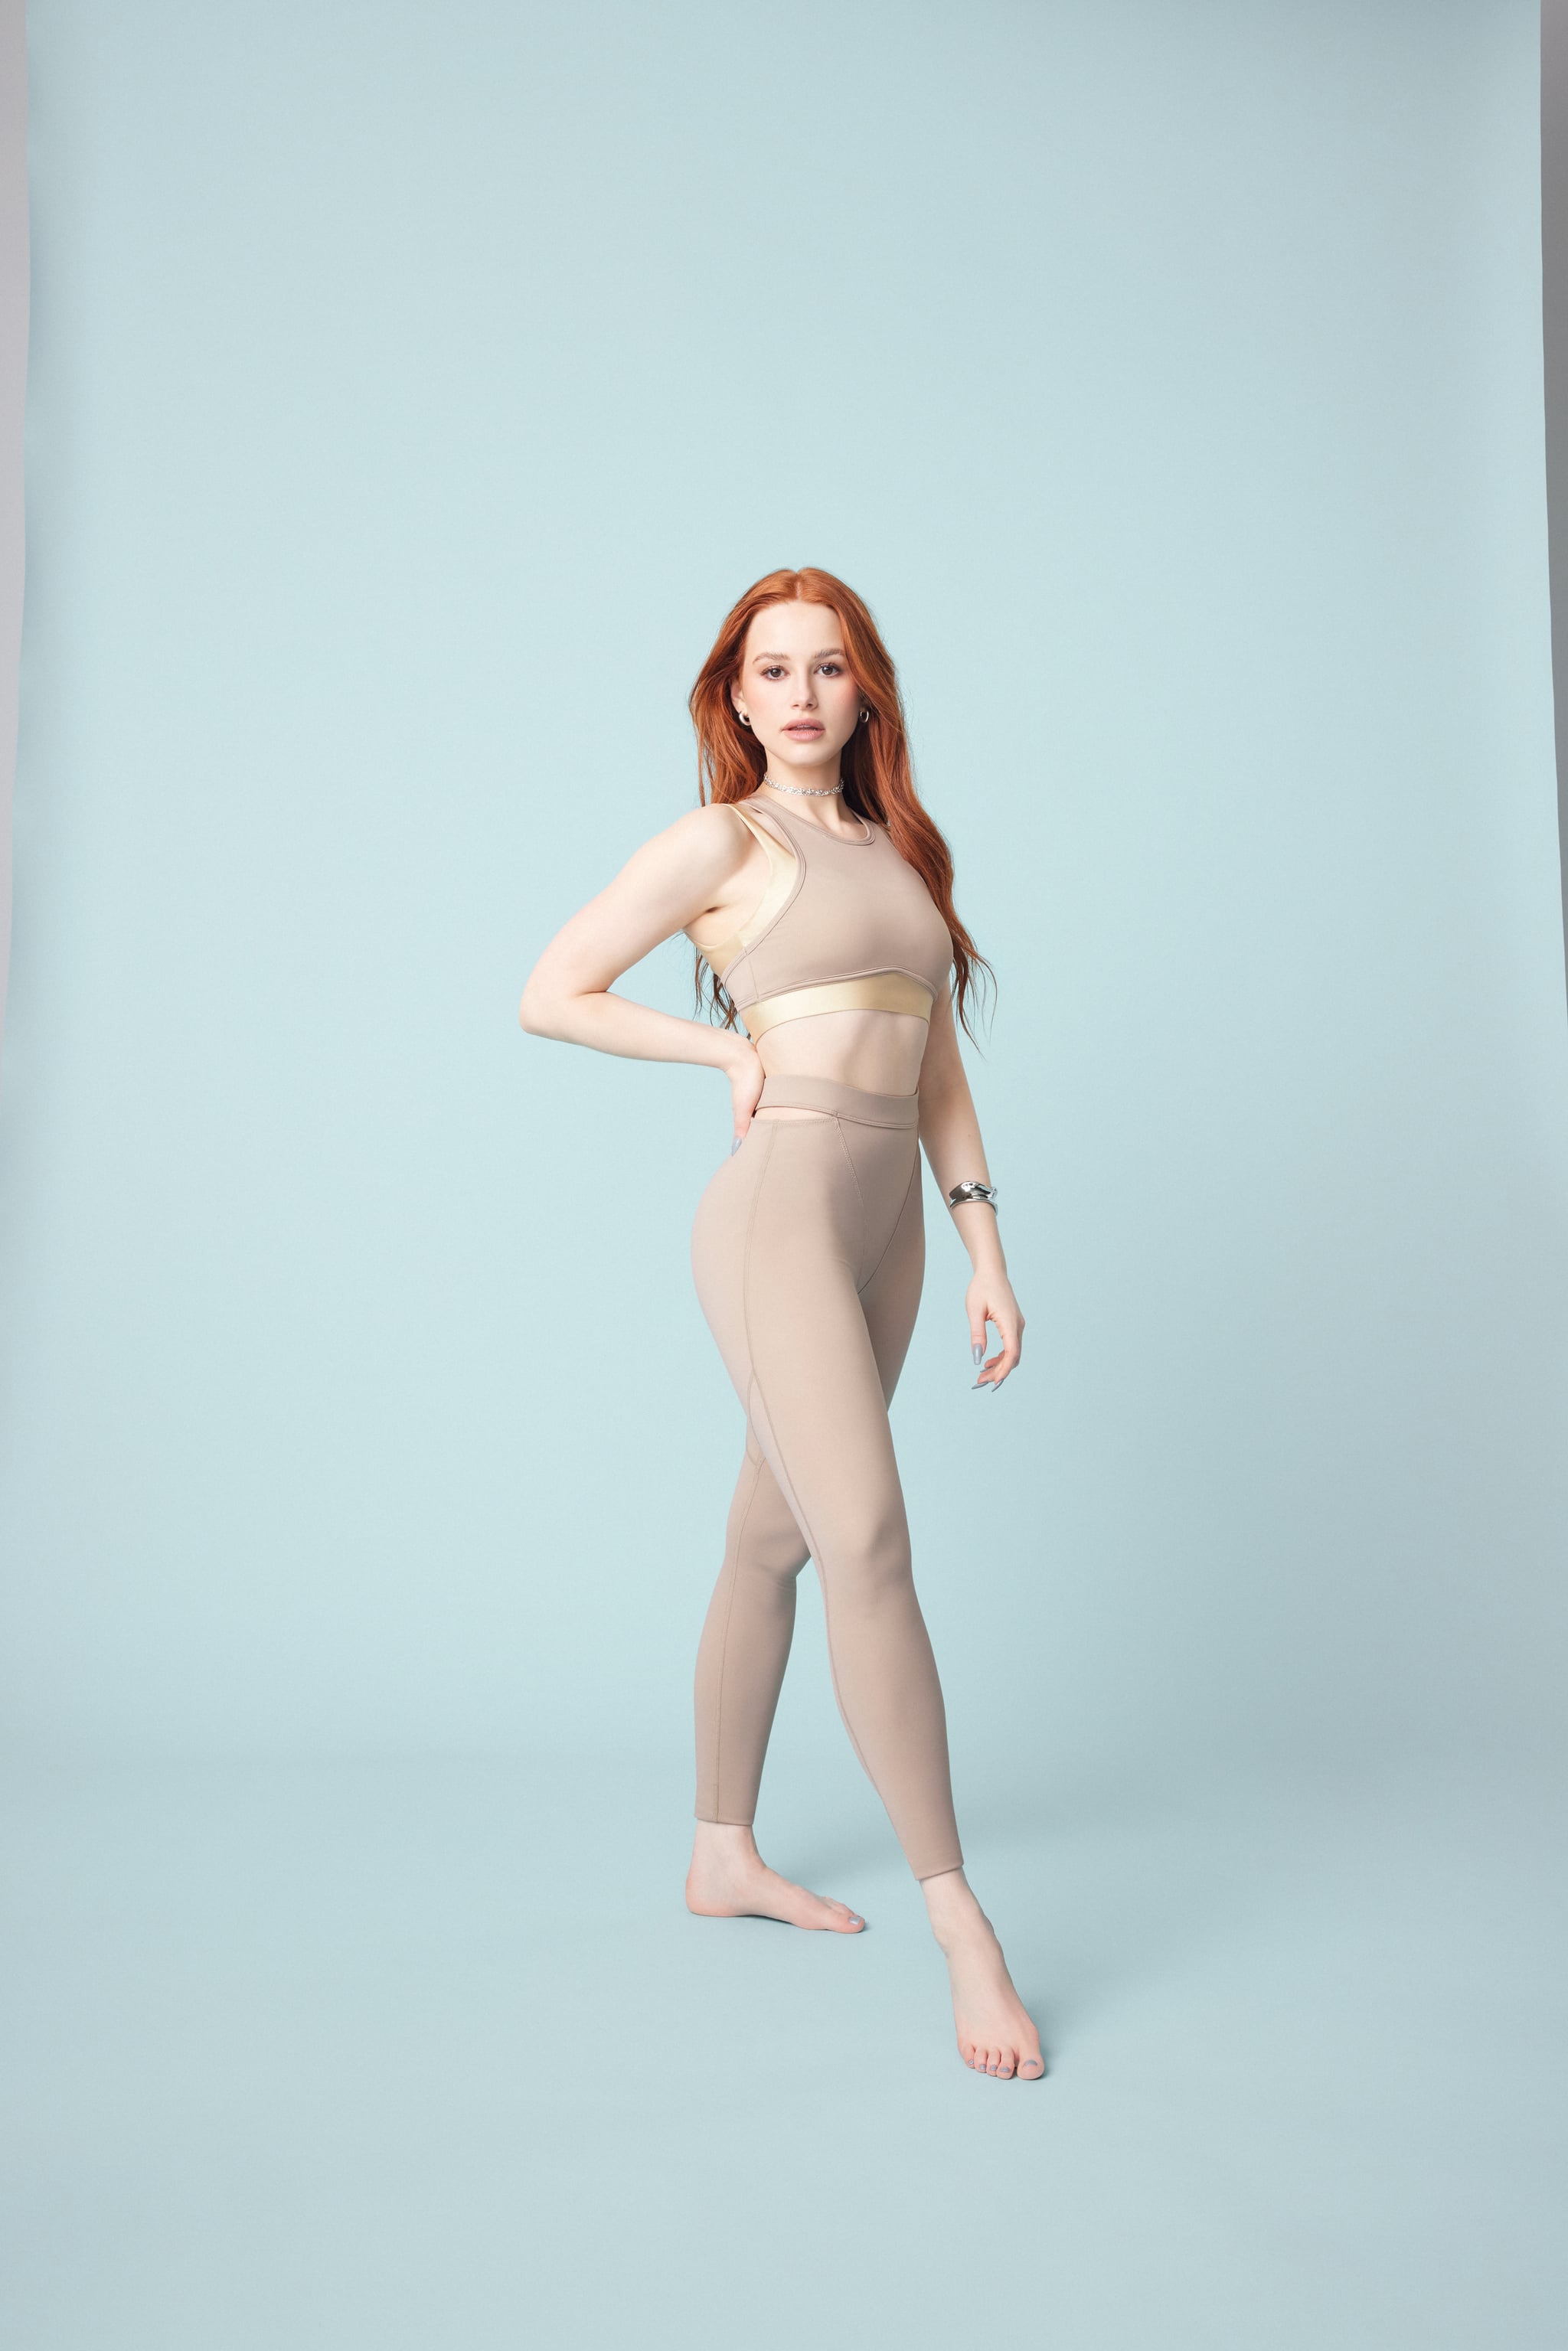 Fabletics x Madelaine Petsch Peyton SculptKnit Long-Sleeve Top and High- Waisted SculptKnit Legging, Madelaine Petsch's New Fabletics Collection  Has Us Ready For Spring